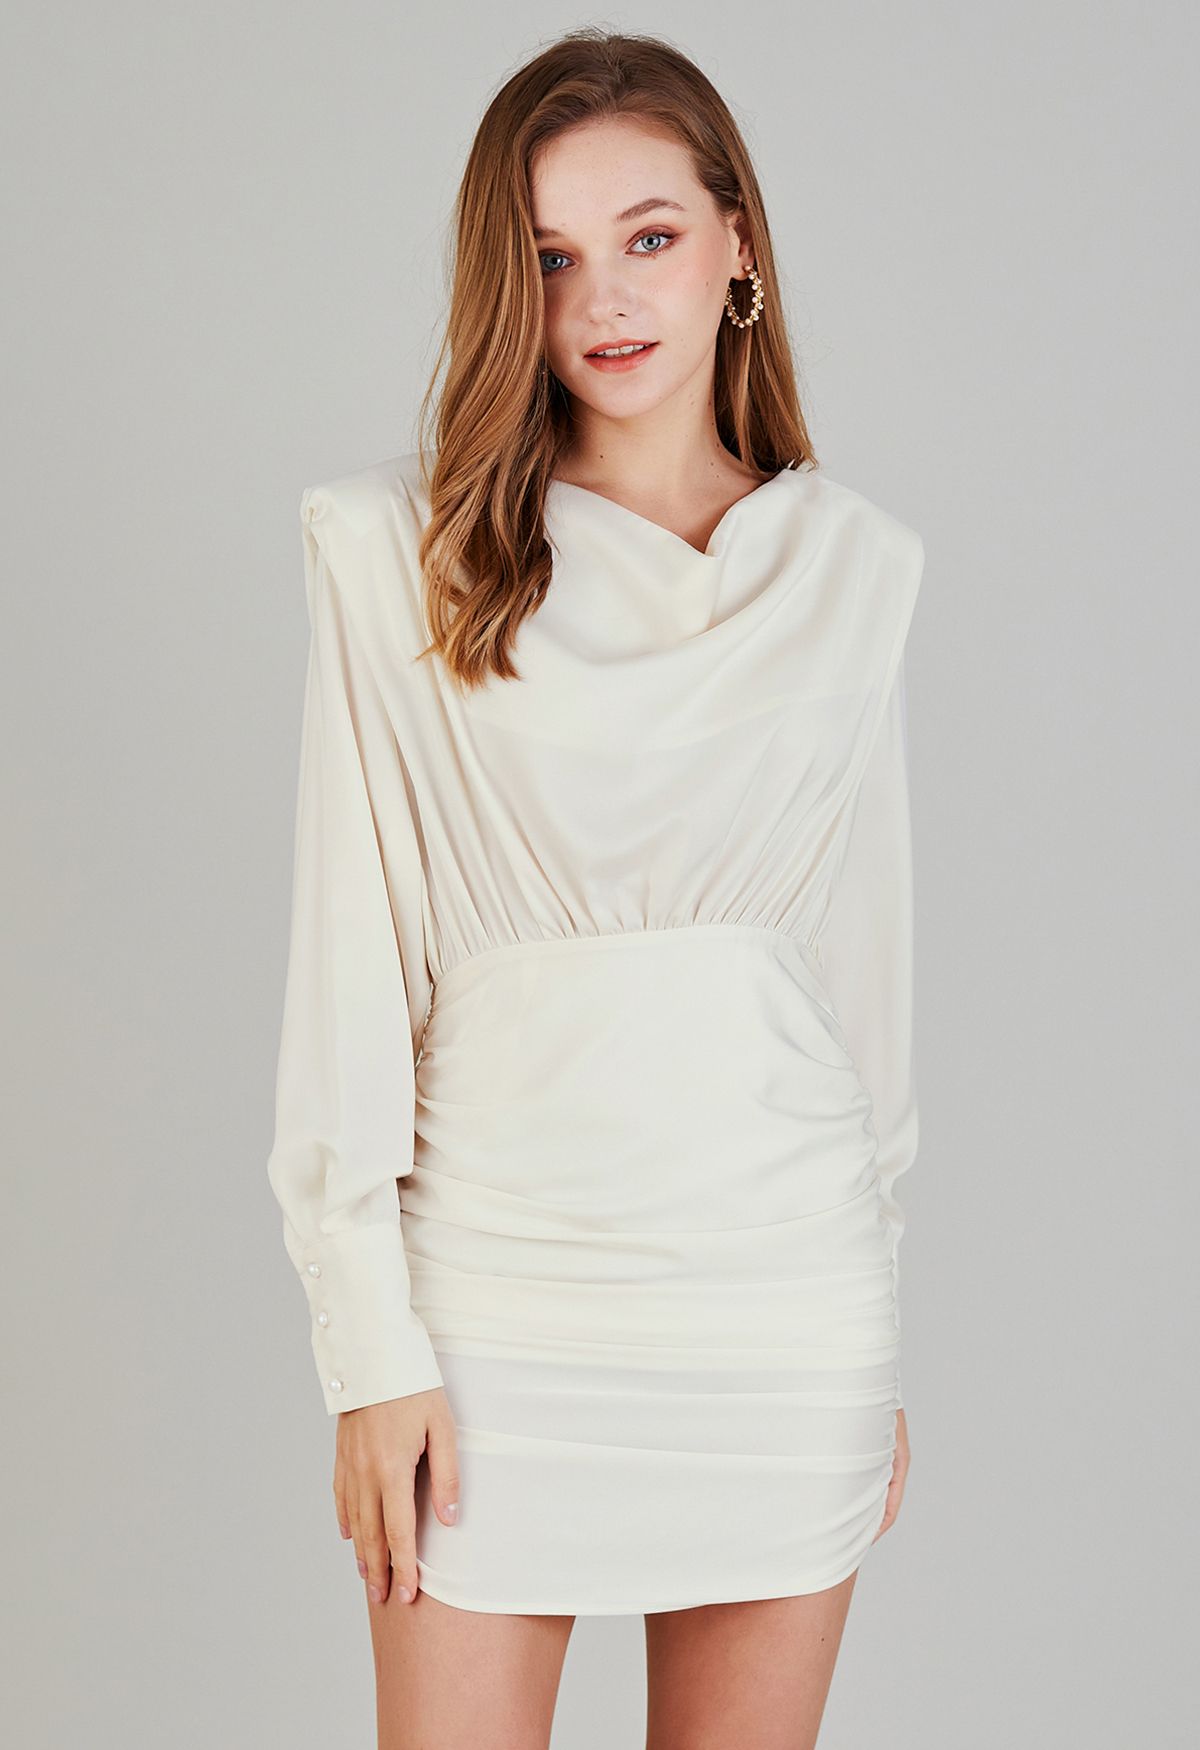 Padded Shoulder Cowl Neck Ruched Satin Dress in Cream